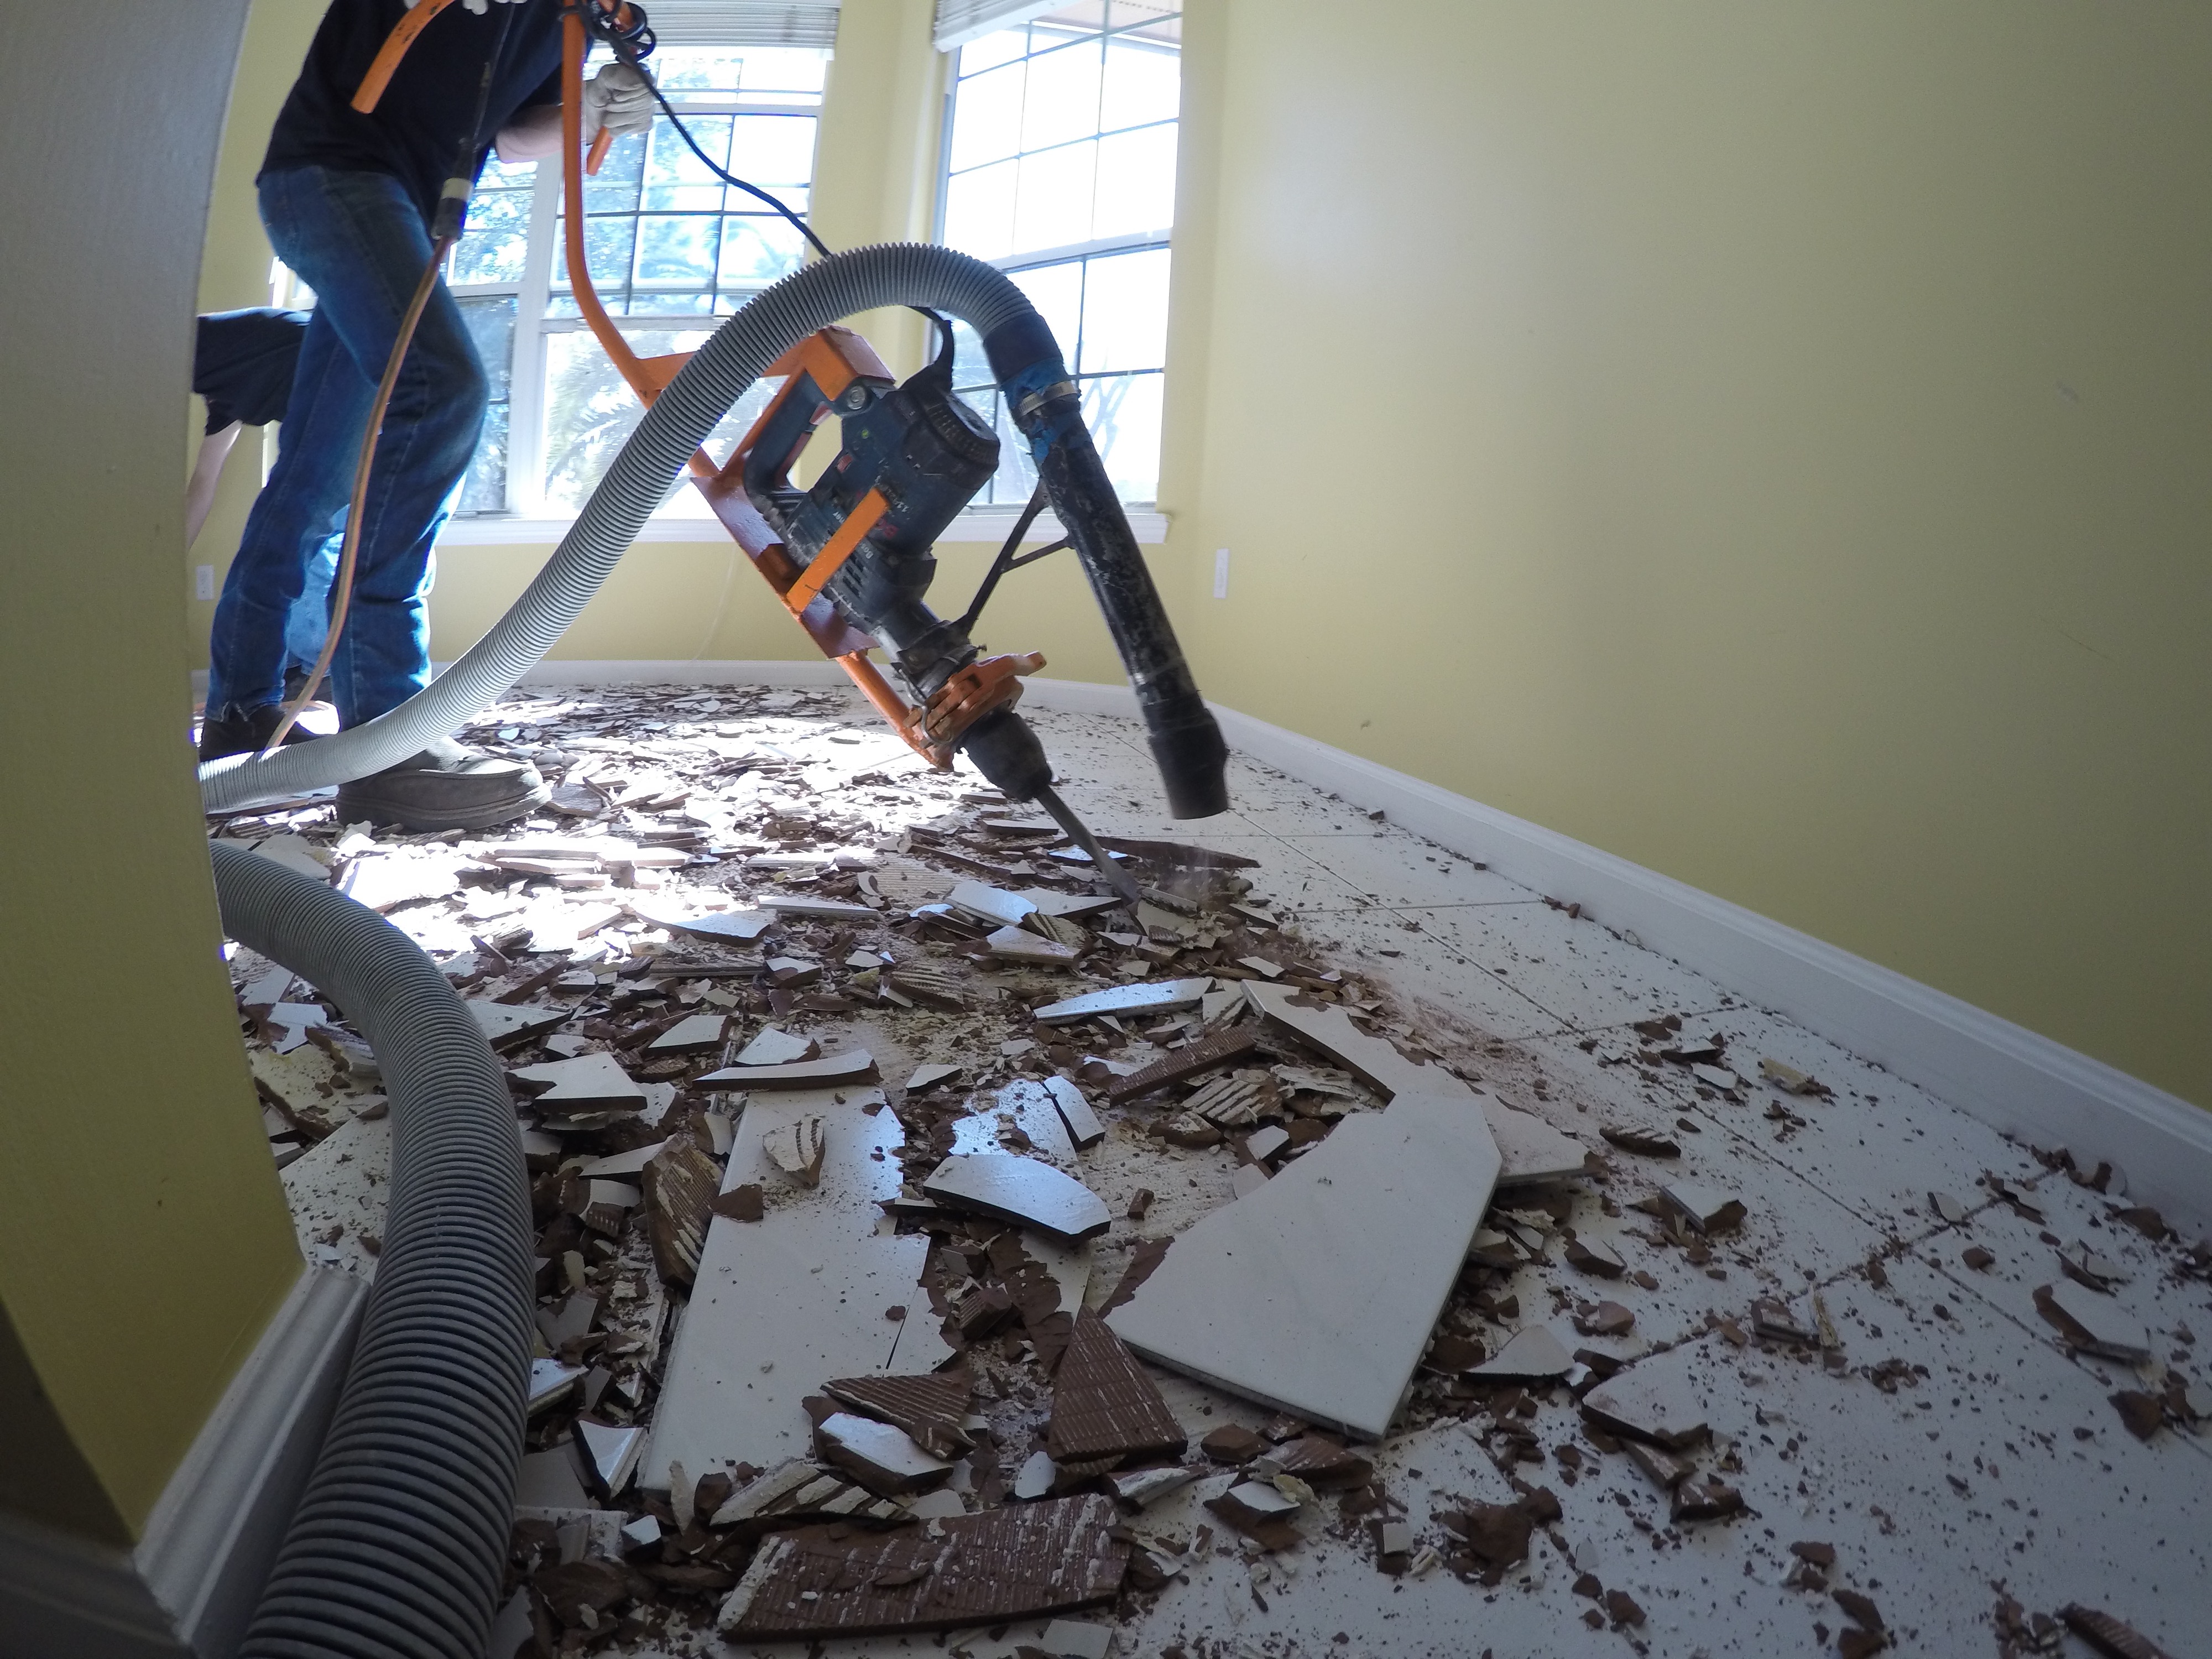 Tile Removal The Easy Way Sdy, Best Way To Demo Ceramic Floor Tile